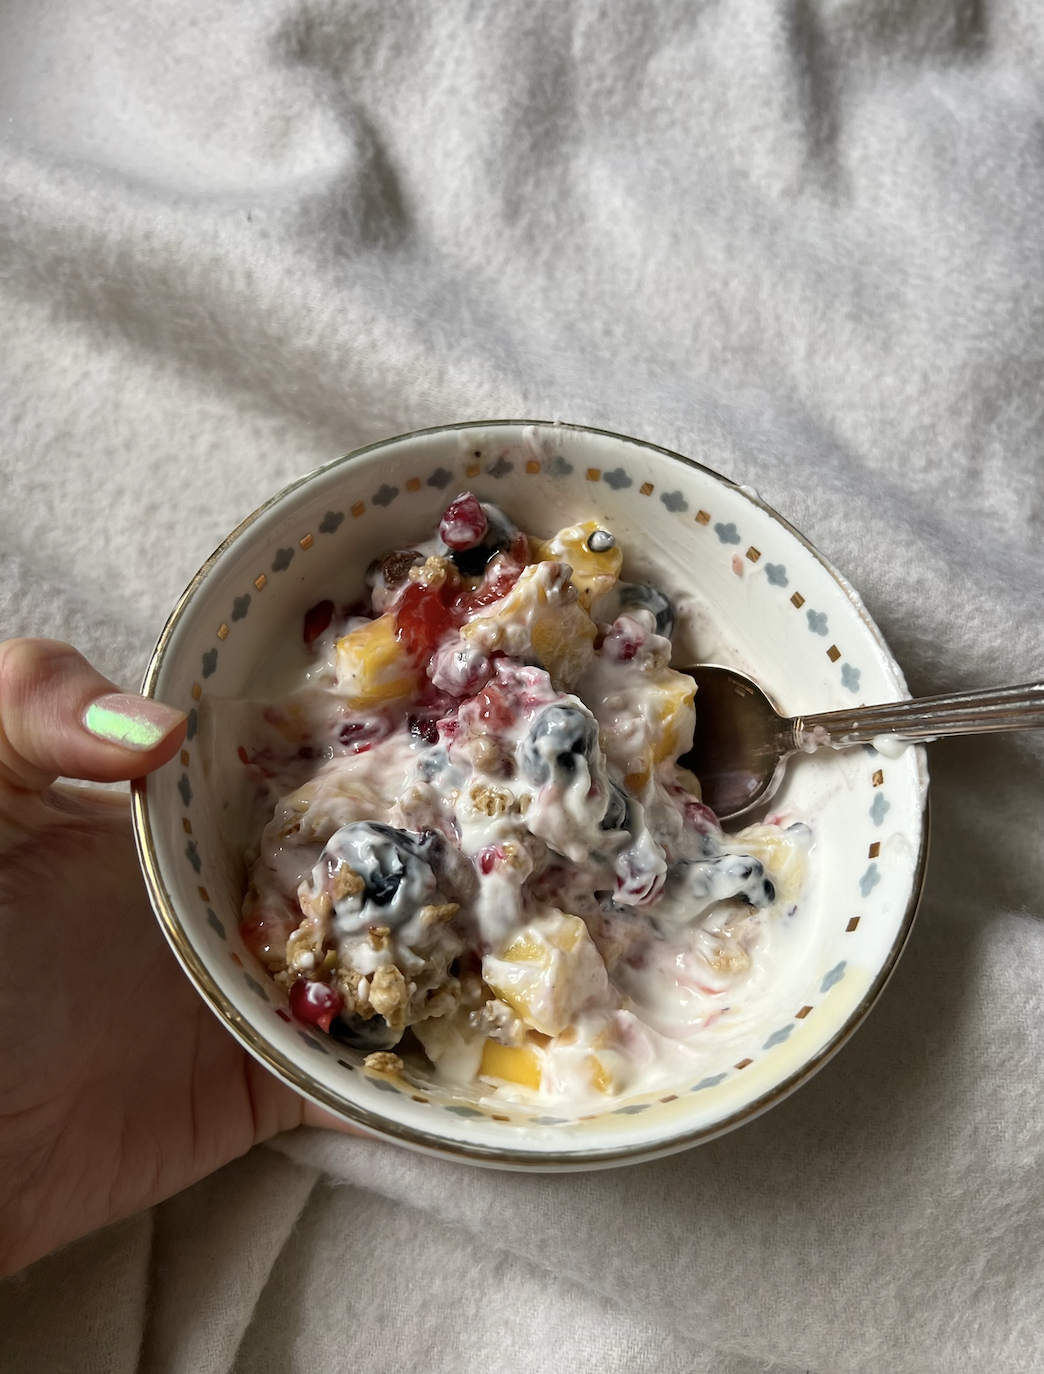 Person holding a bowl of mixed fruit and yogurt with a spoon, from a first-person perspective